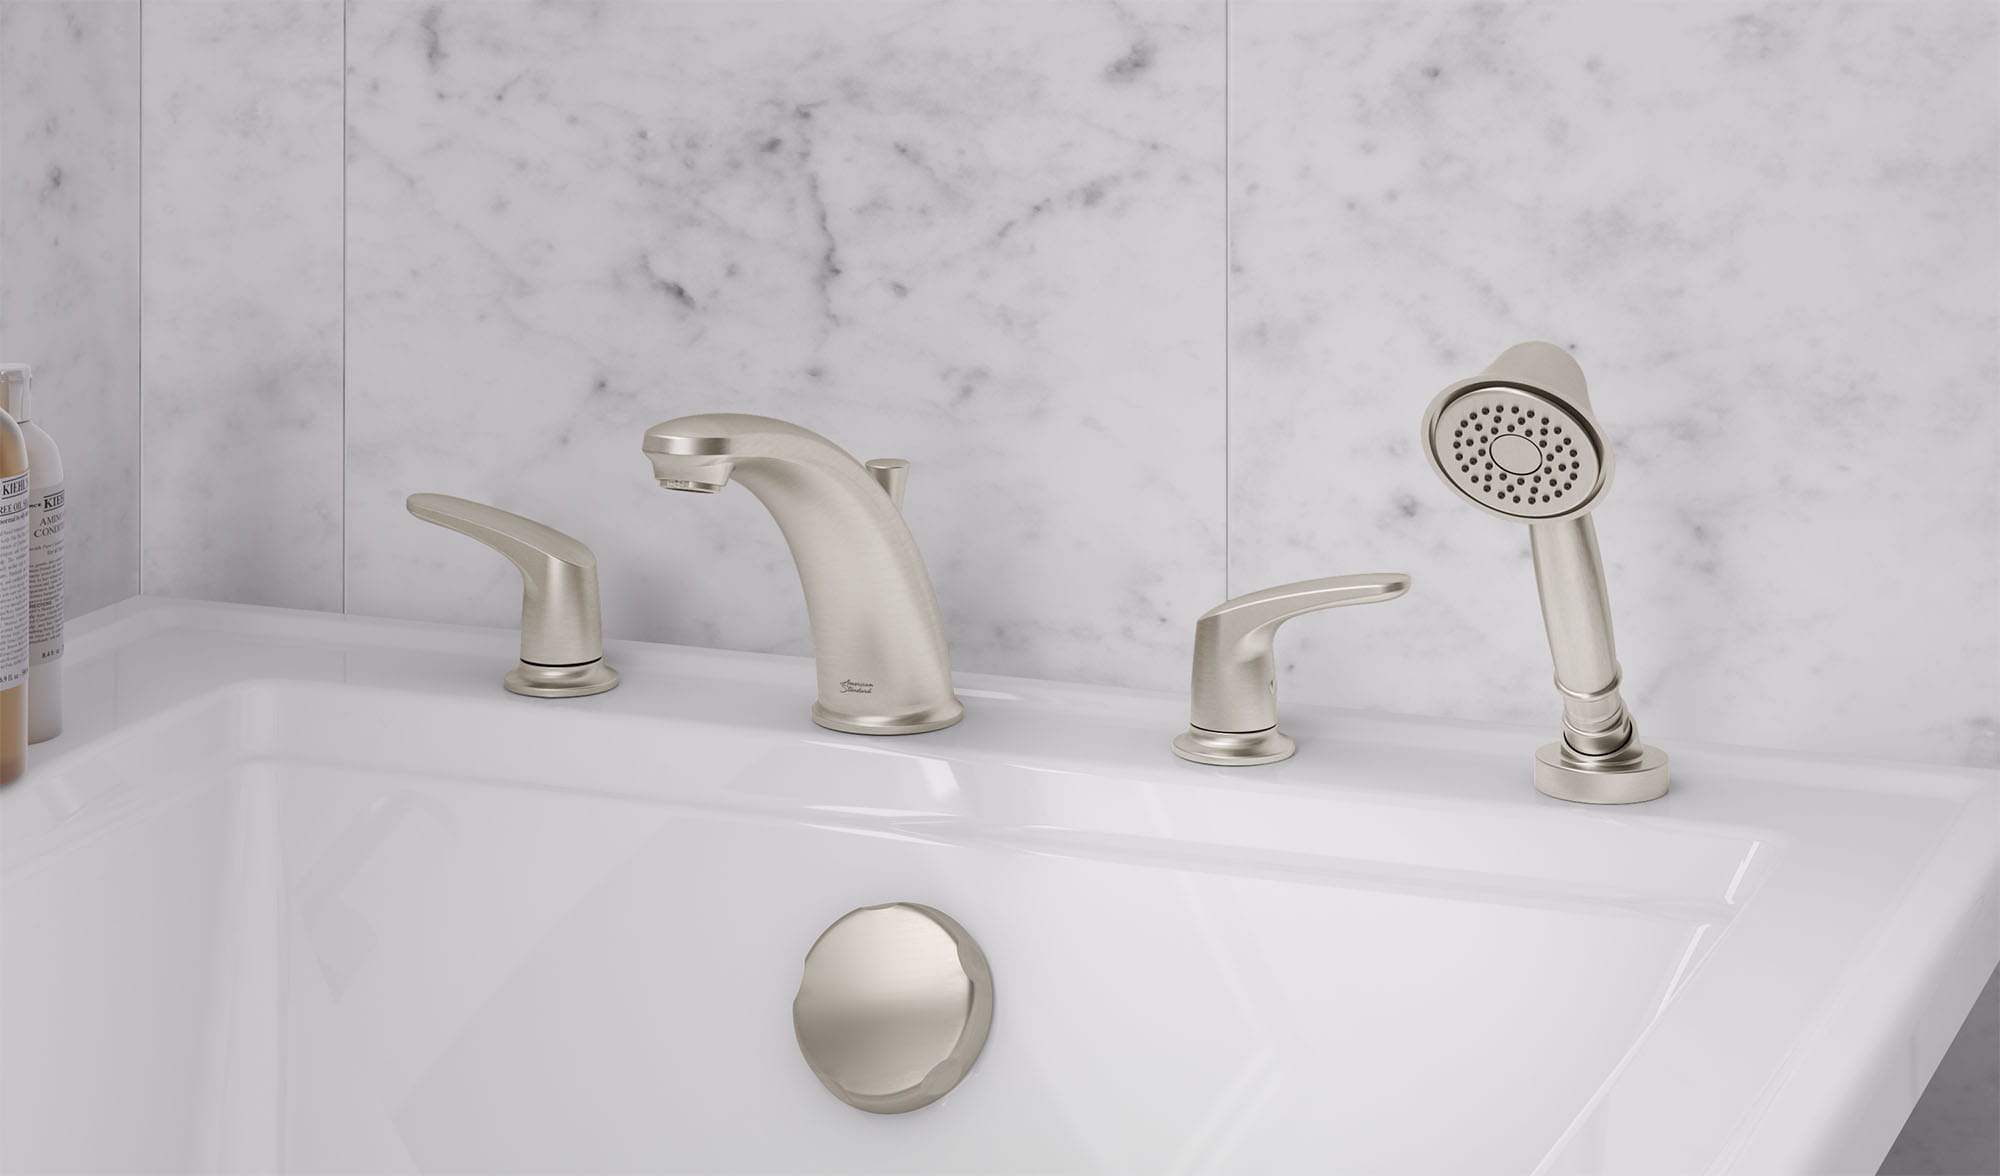 Colony PRO Bathtub Faucet Trim With Lever Handles and Personal Shower for Flash Rough In Valve   BRUSHED NICKEL